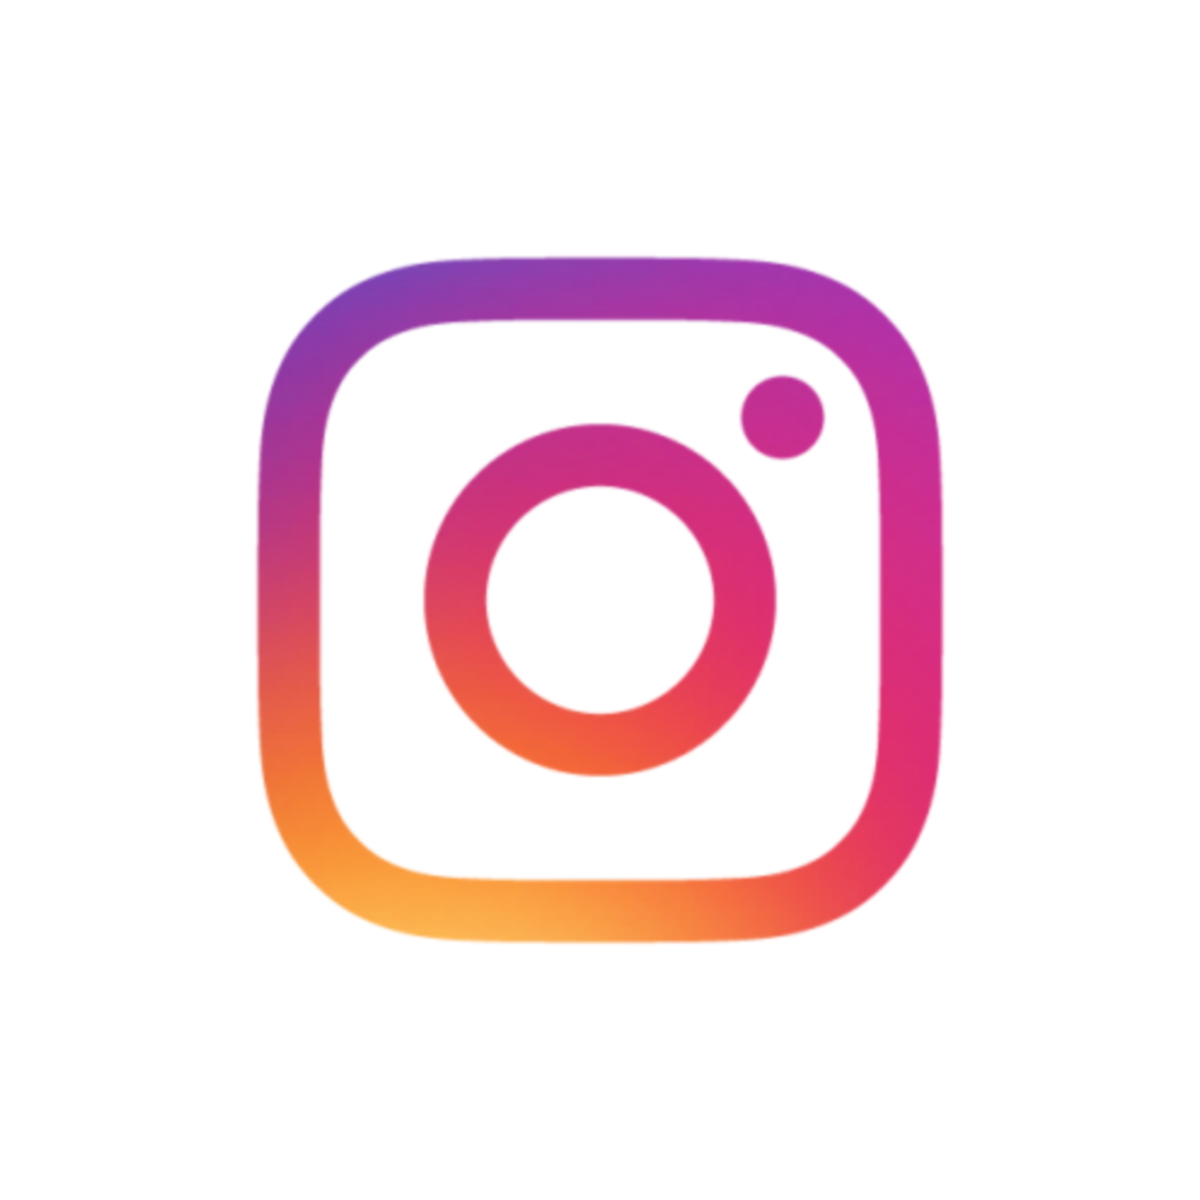 copy and paste symbols for instagram